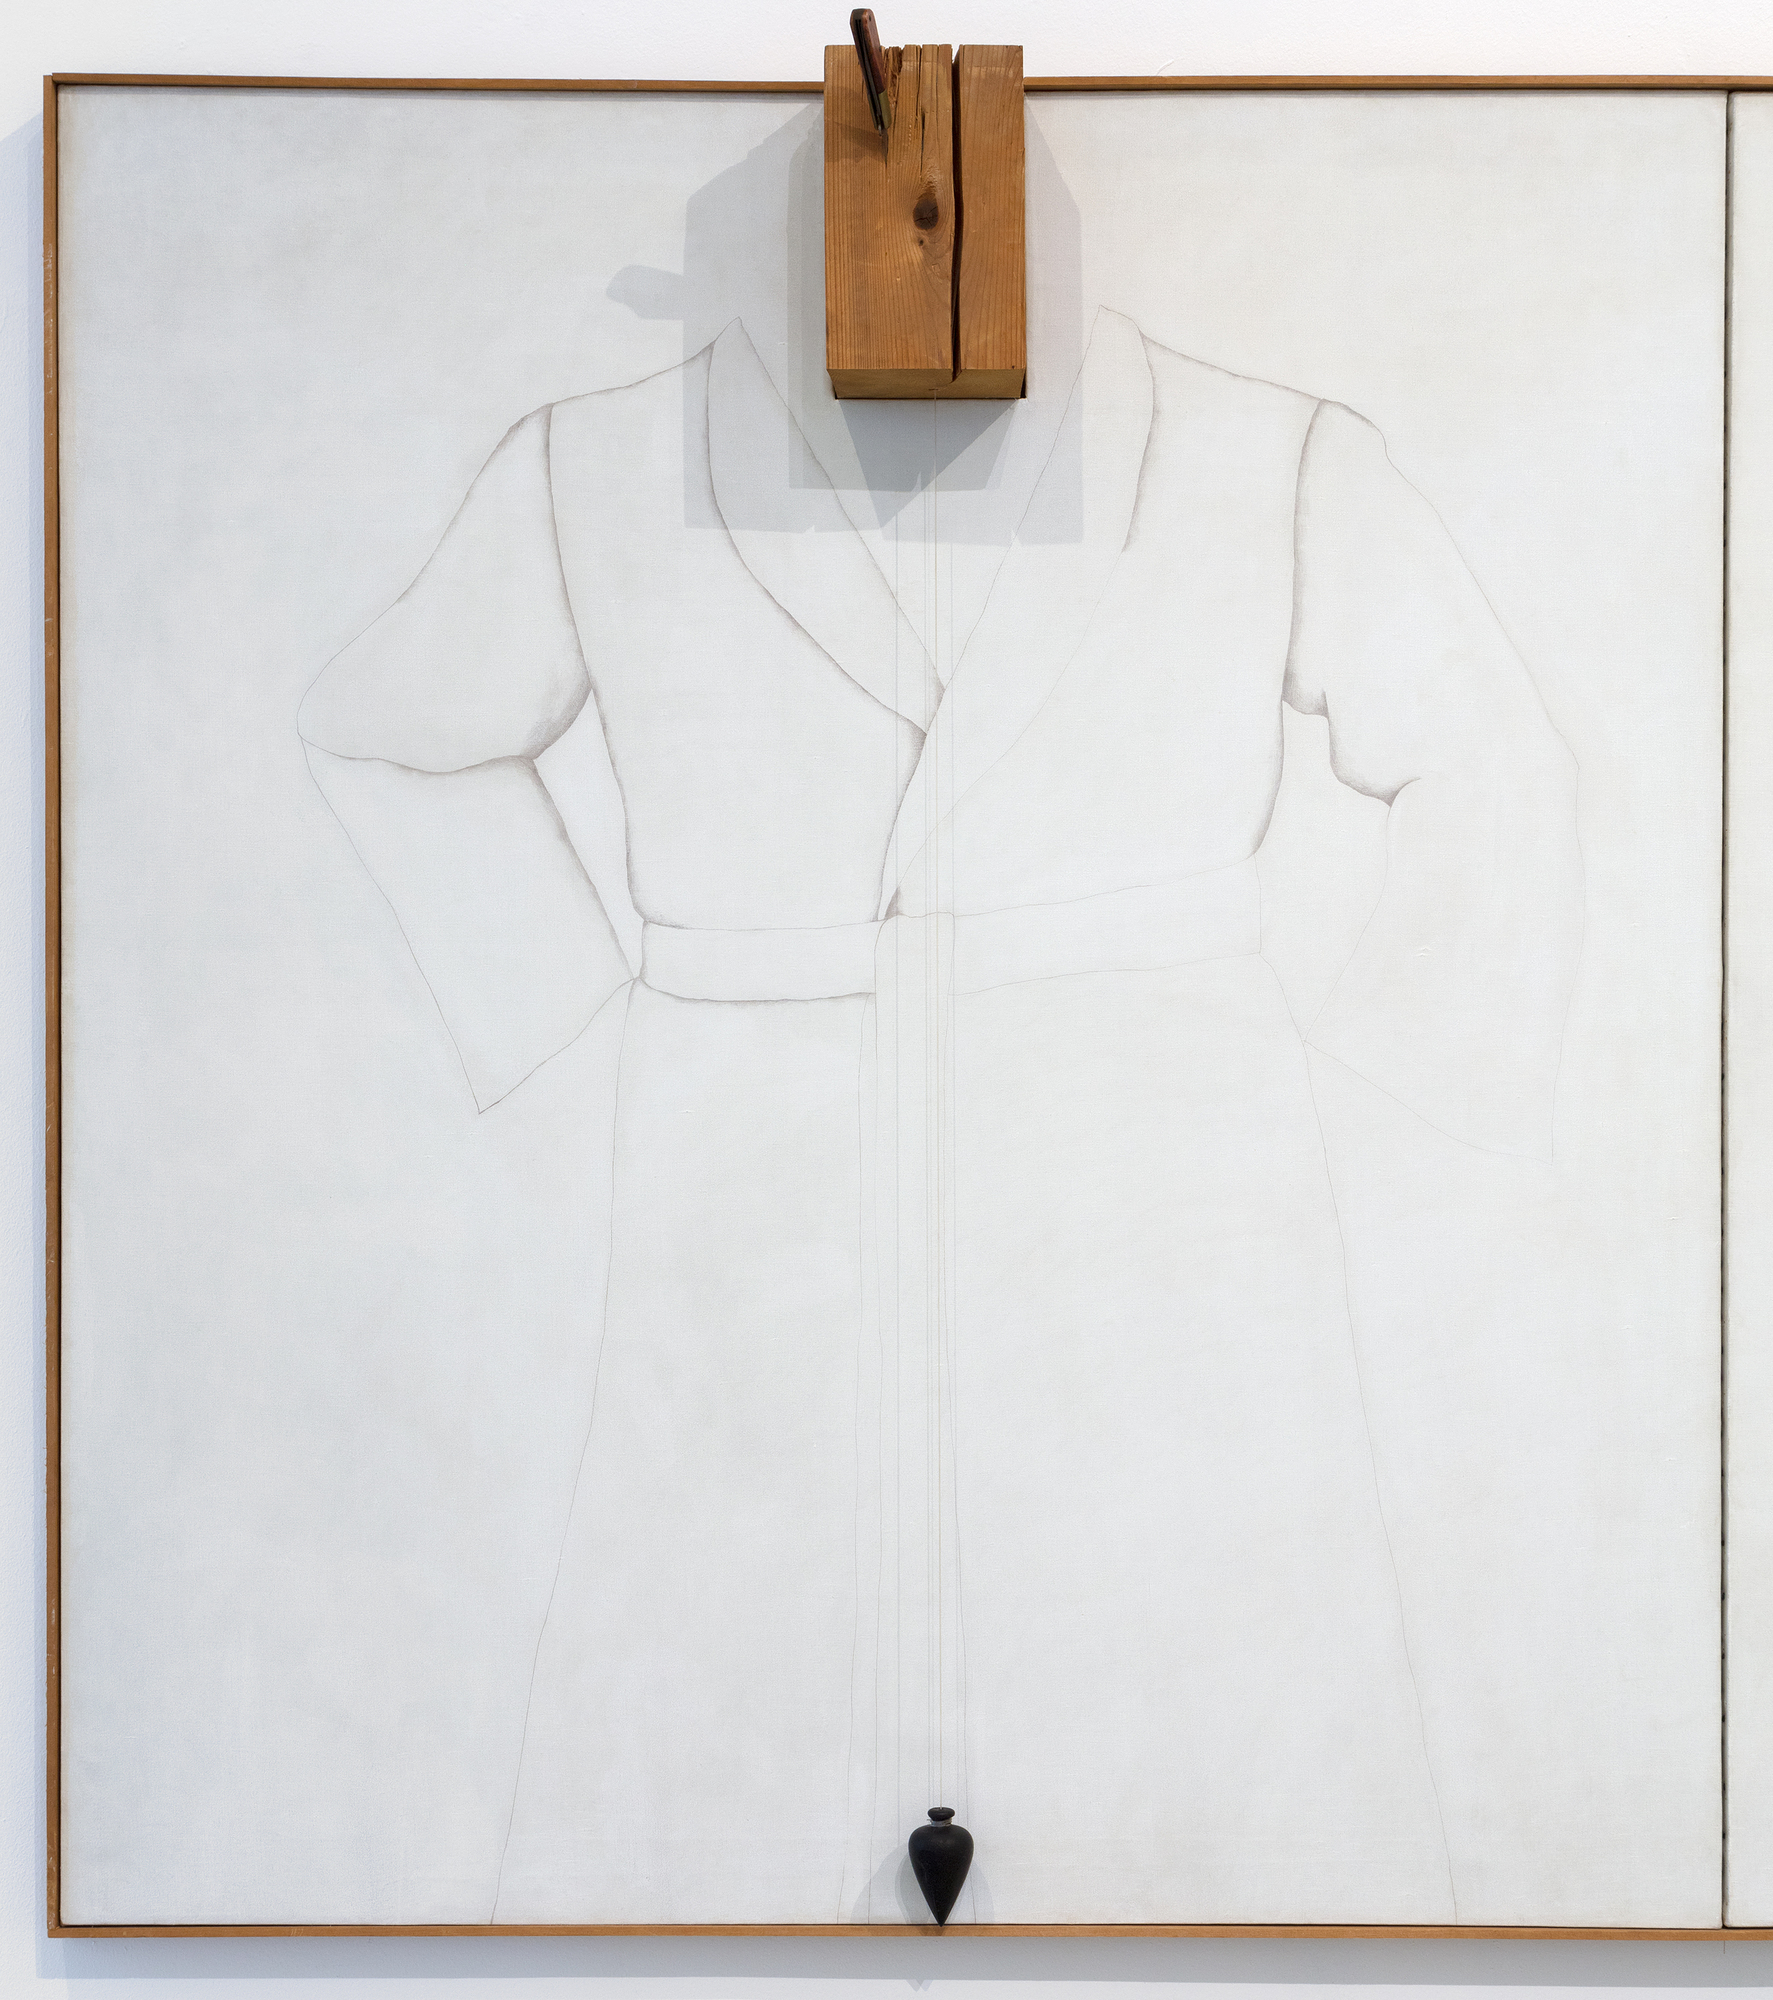 Jim Dine was an American Pop artist whose work meditated on objects with childlike appeal to find a universal and nostalgic language. Dine’s robes are among the most recognizable images to have emerged from his long and illustrious career. They were first shown at Sidney Janis gallery in the fall of 1964 – this is one such example. Double Silver Point Robes is a large-scale mixed media assemblage. The work is executed in silverpoint – a technique that utilizes a piece of silver as a drawing instrument over a specially prepared ground by which it oxidizes over a period of months to create a warm brown tone. The two joined canvases feature blocks of wood in place of where the heads should be and a hanging wood element that moves in response to air currents.